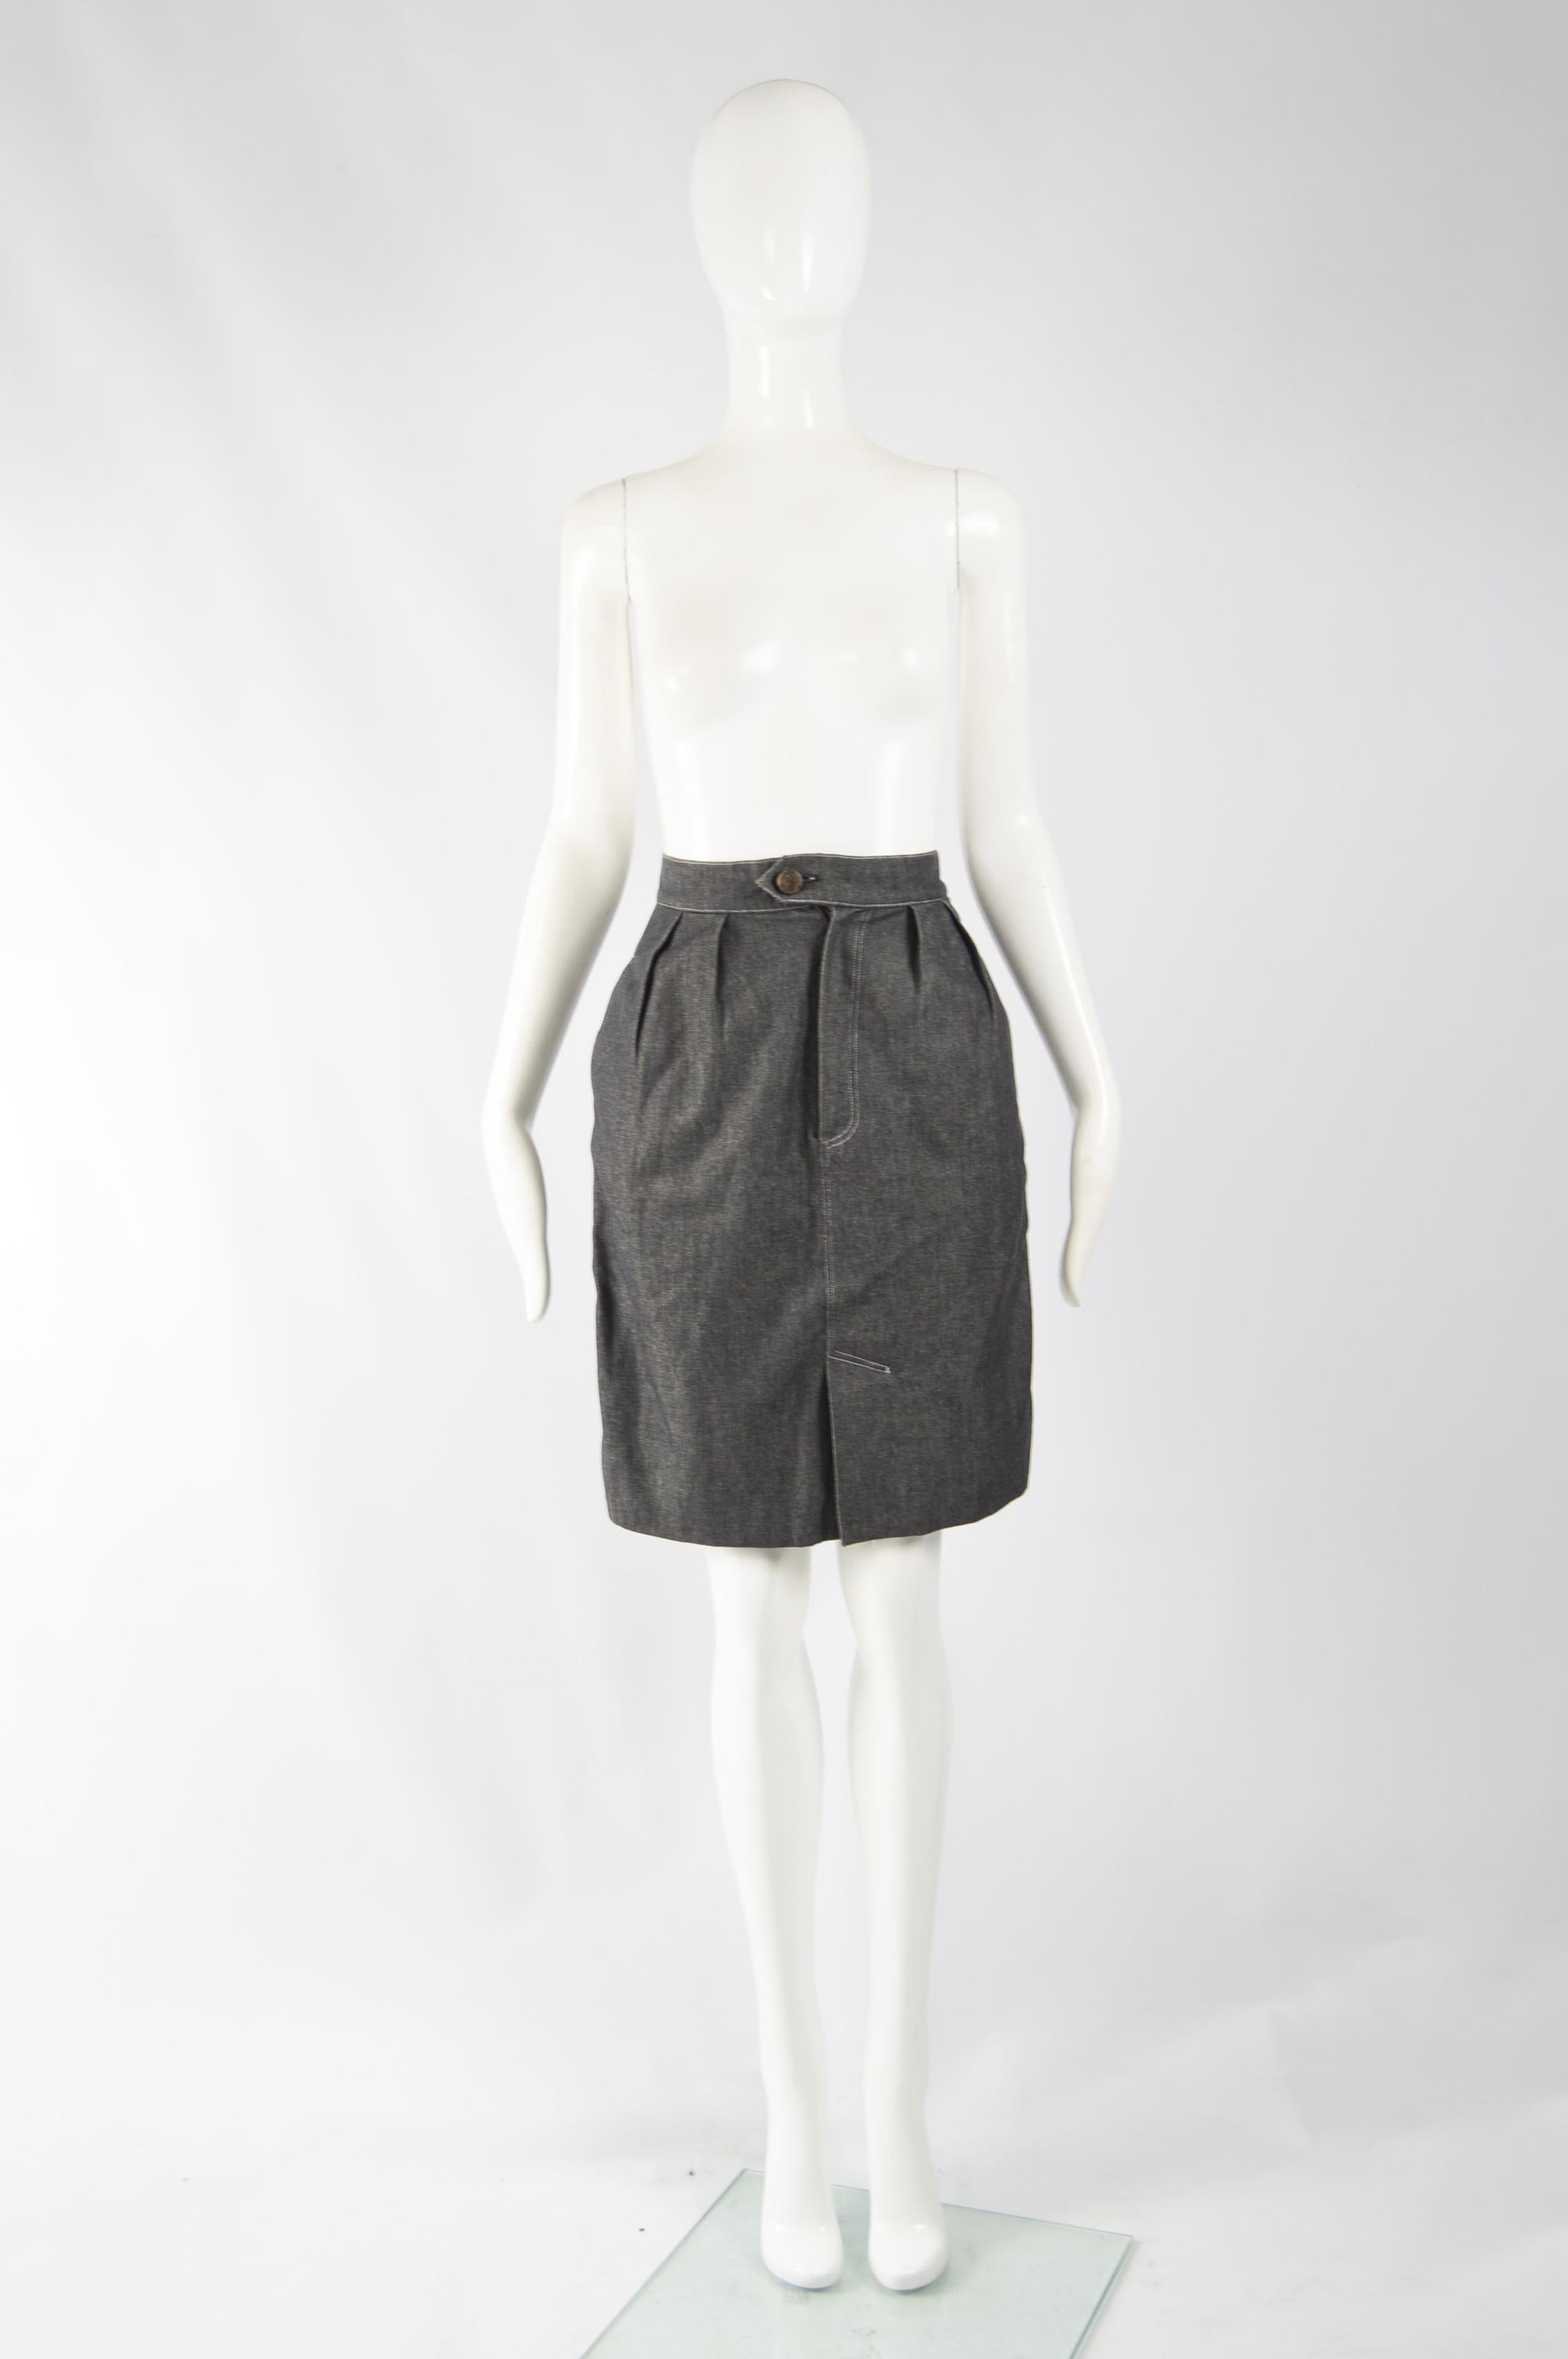 A cute vintage high waisted, lined jeans skirt from 80s by legendary fashion designer, Patrick Kelly. In a grey denim with darts at the waist to make the hips flare out slightly and make a flattering hourglass shape. It has a black grosgrain stripe